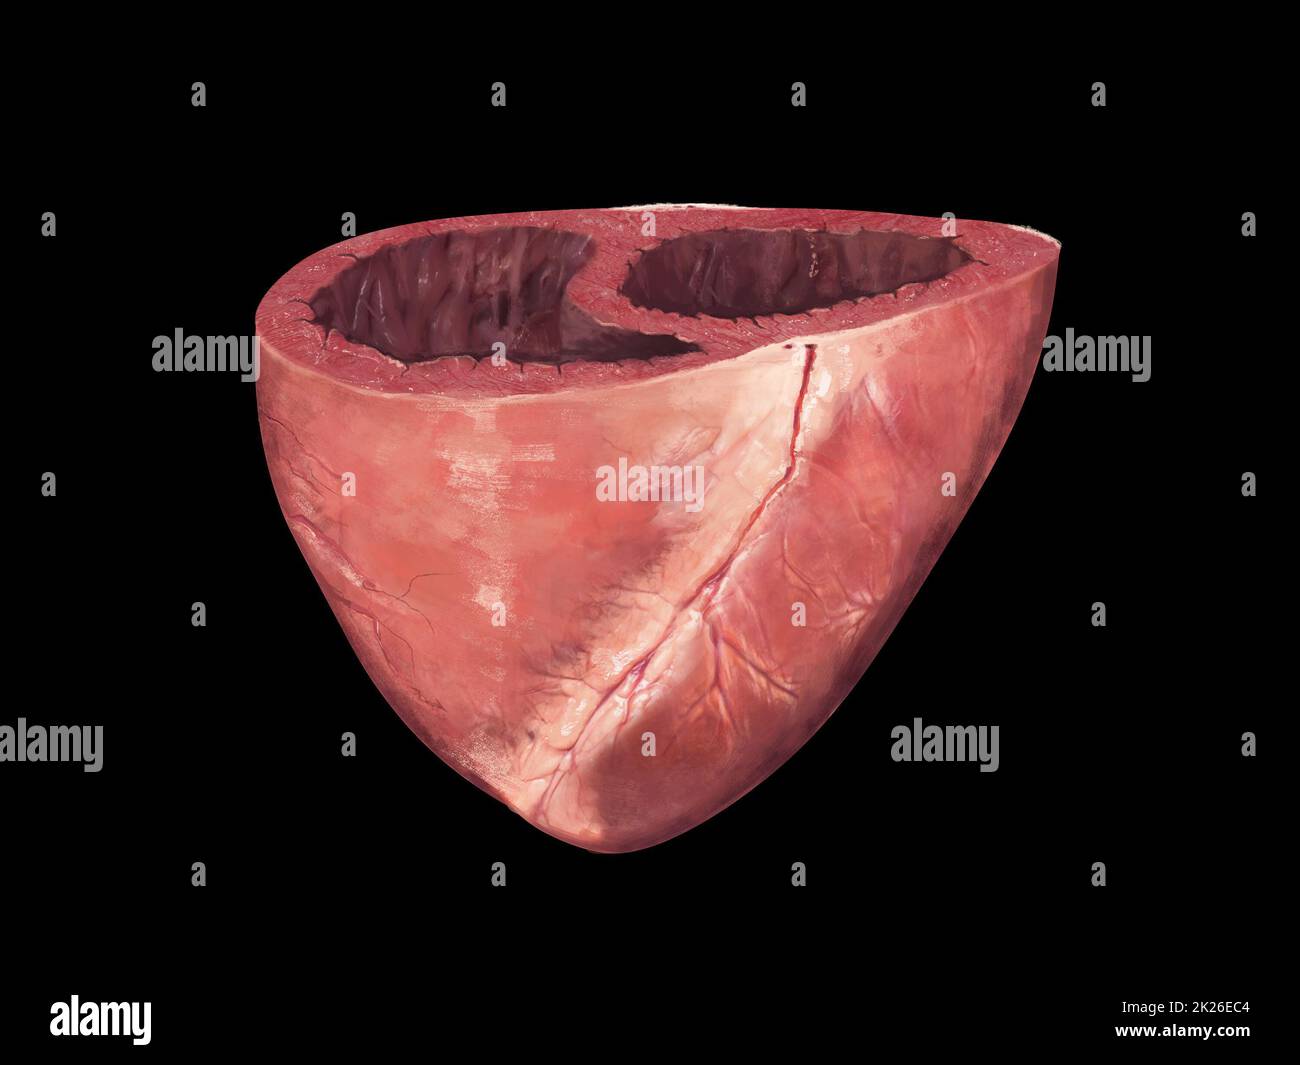 Human heart, cross section, Left and Right Ventricle, Heart ventricles, 3d render Stock Photo